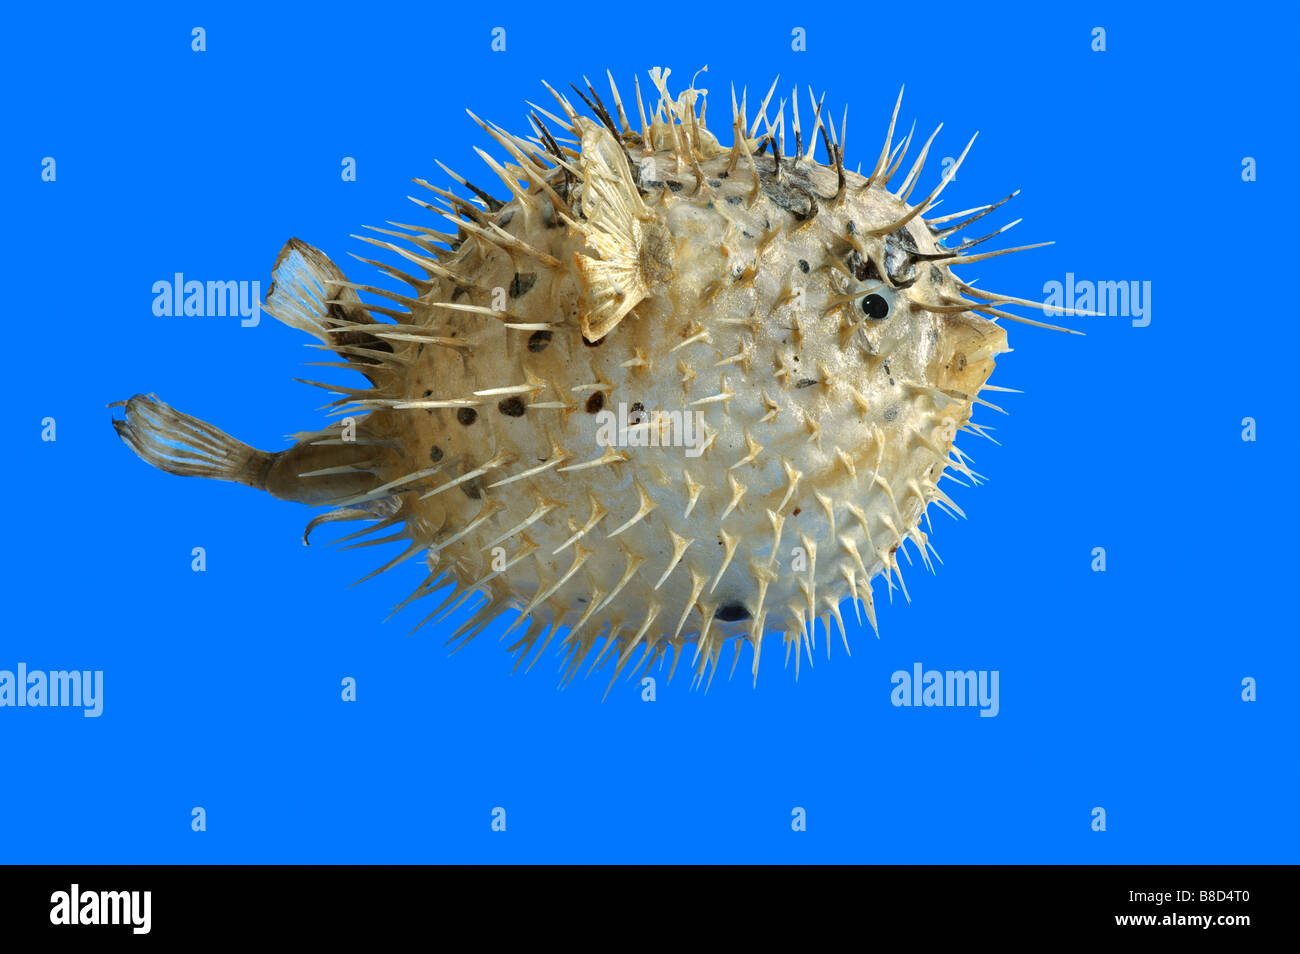 Diodon hystrix.  Dry tropical fish on blue background Stock Photo